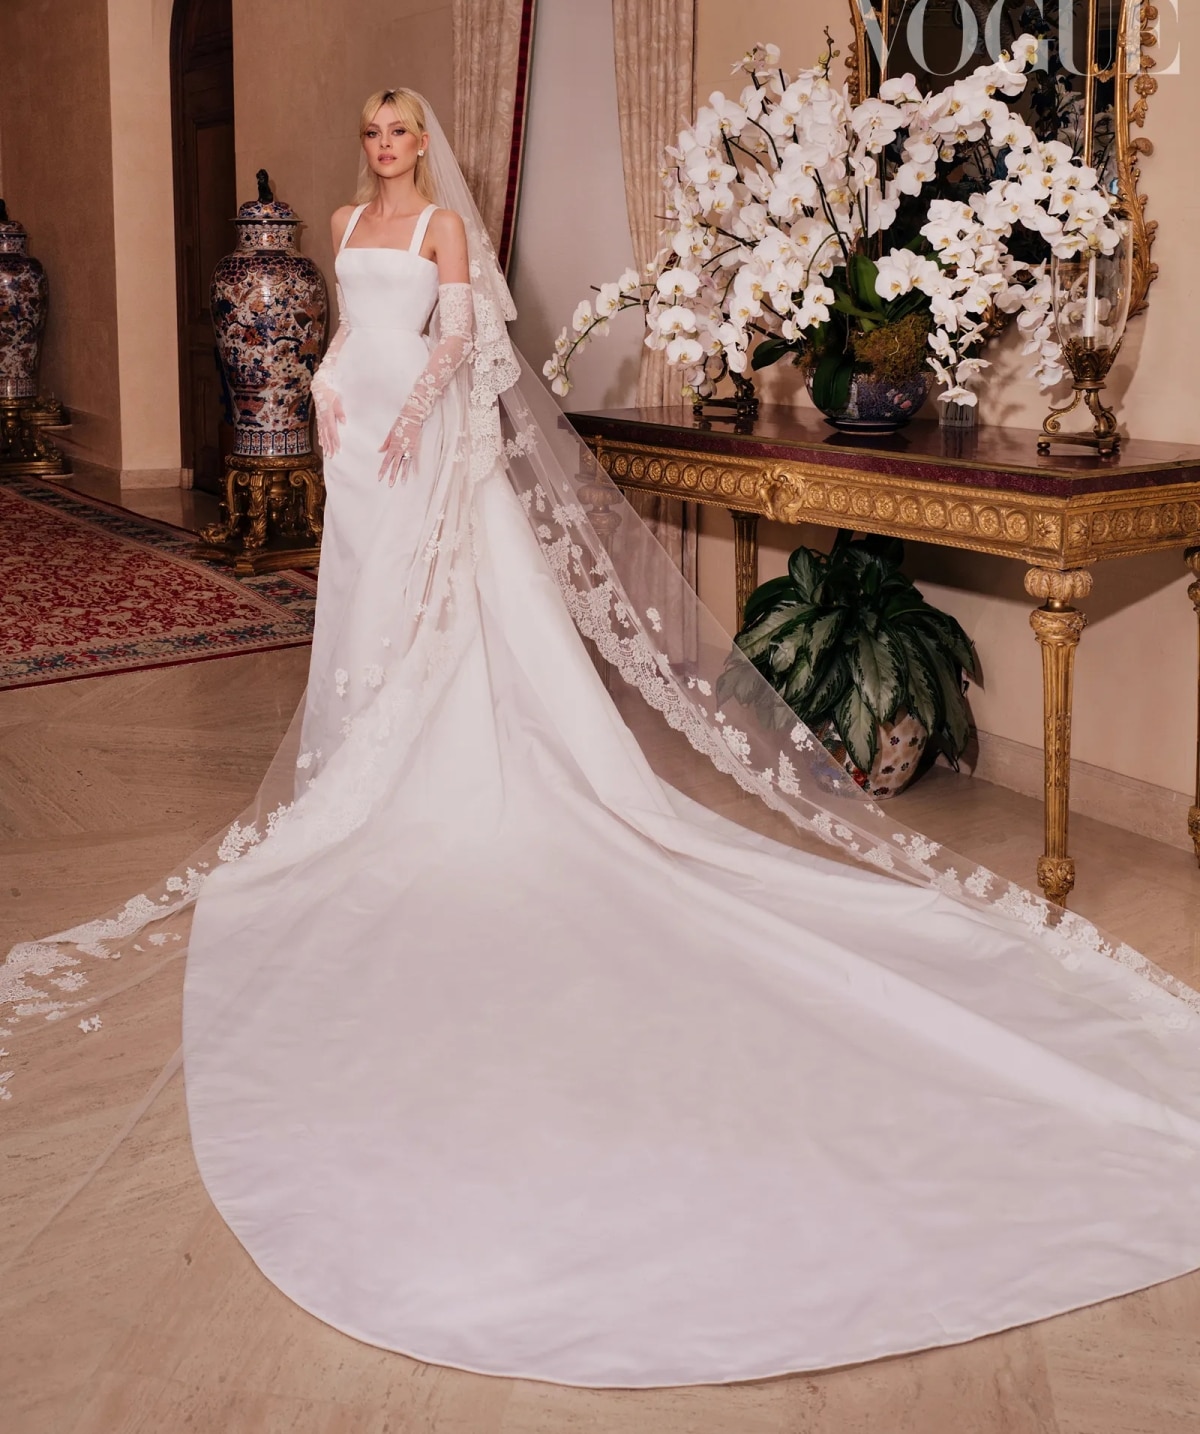 Direct-to-consumer brands are upending US bridalwear